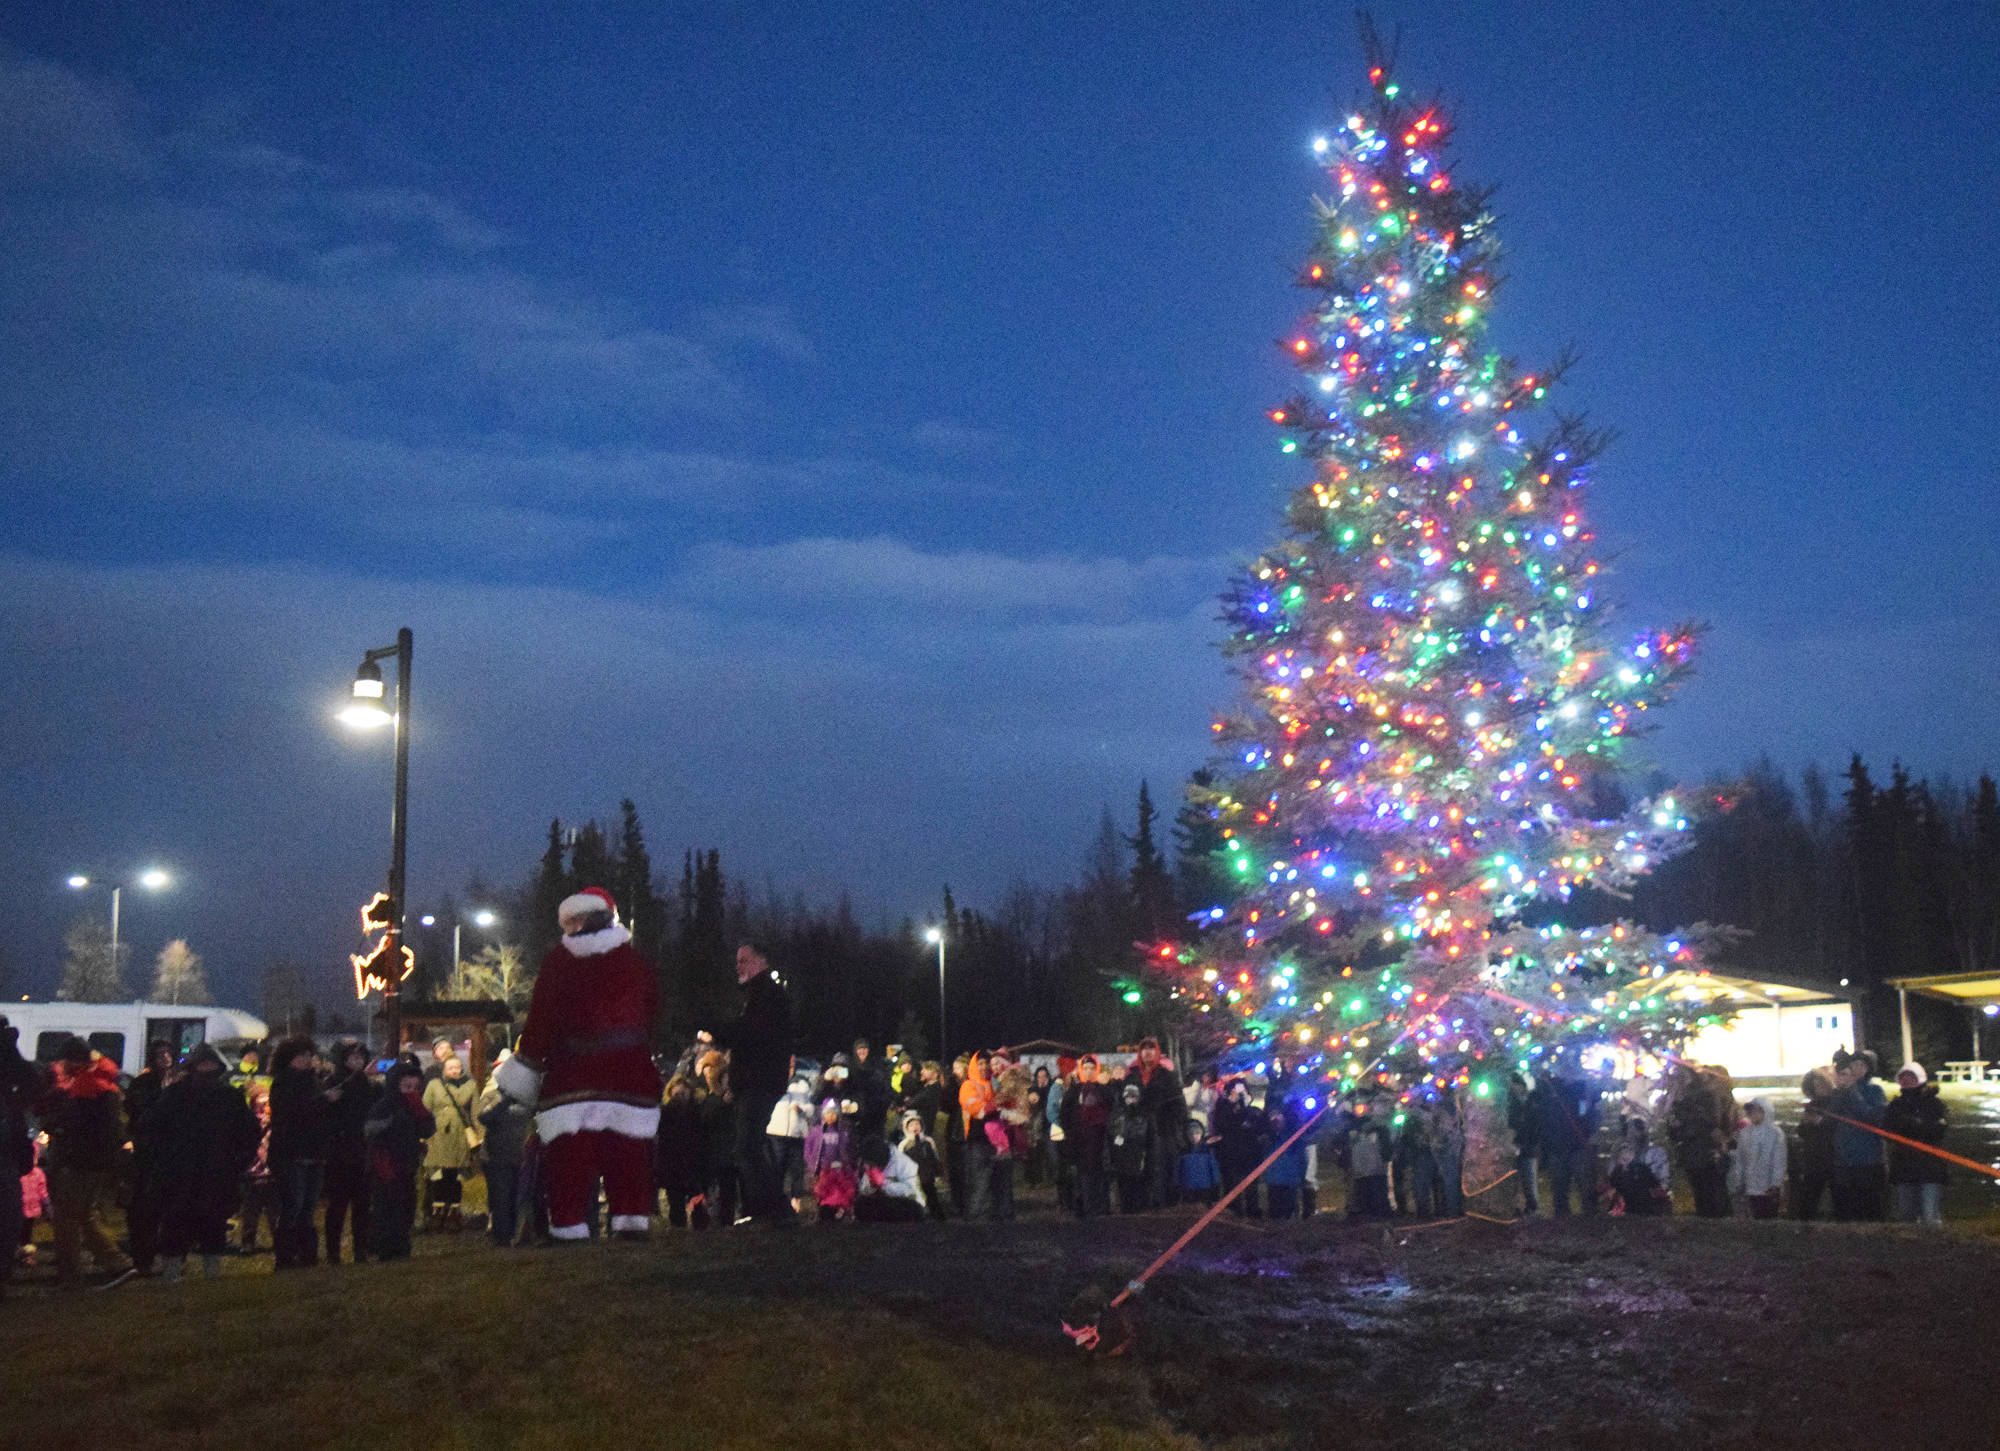 A healthy crowd watches as Santa Claus turns on the lights adorning the Christmas tree Saturday evening at the Christmas in the Park tree lighting ceremony at Soldotna Creek Park. (Photo by Joey Klecka/Peninsula Clarion)